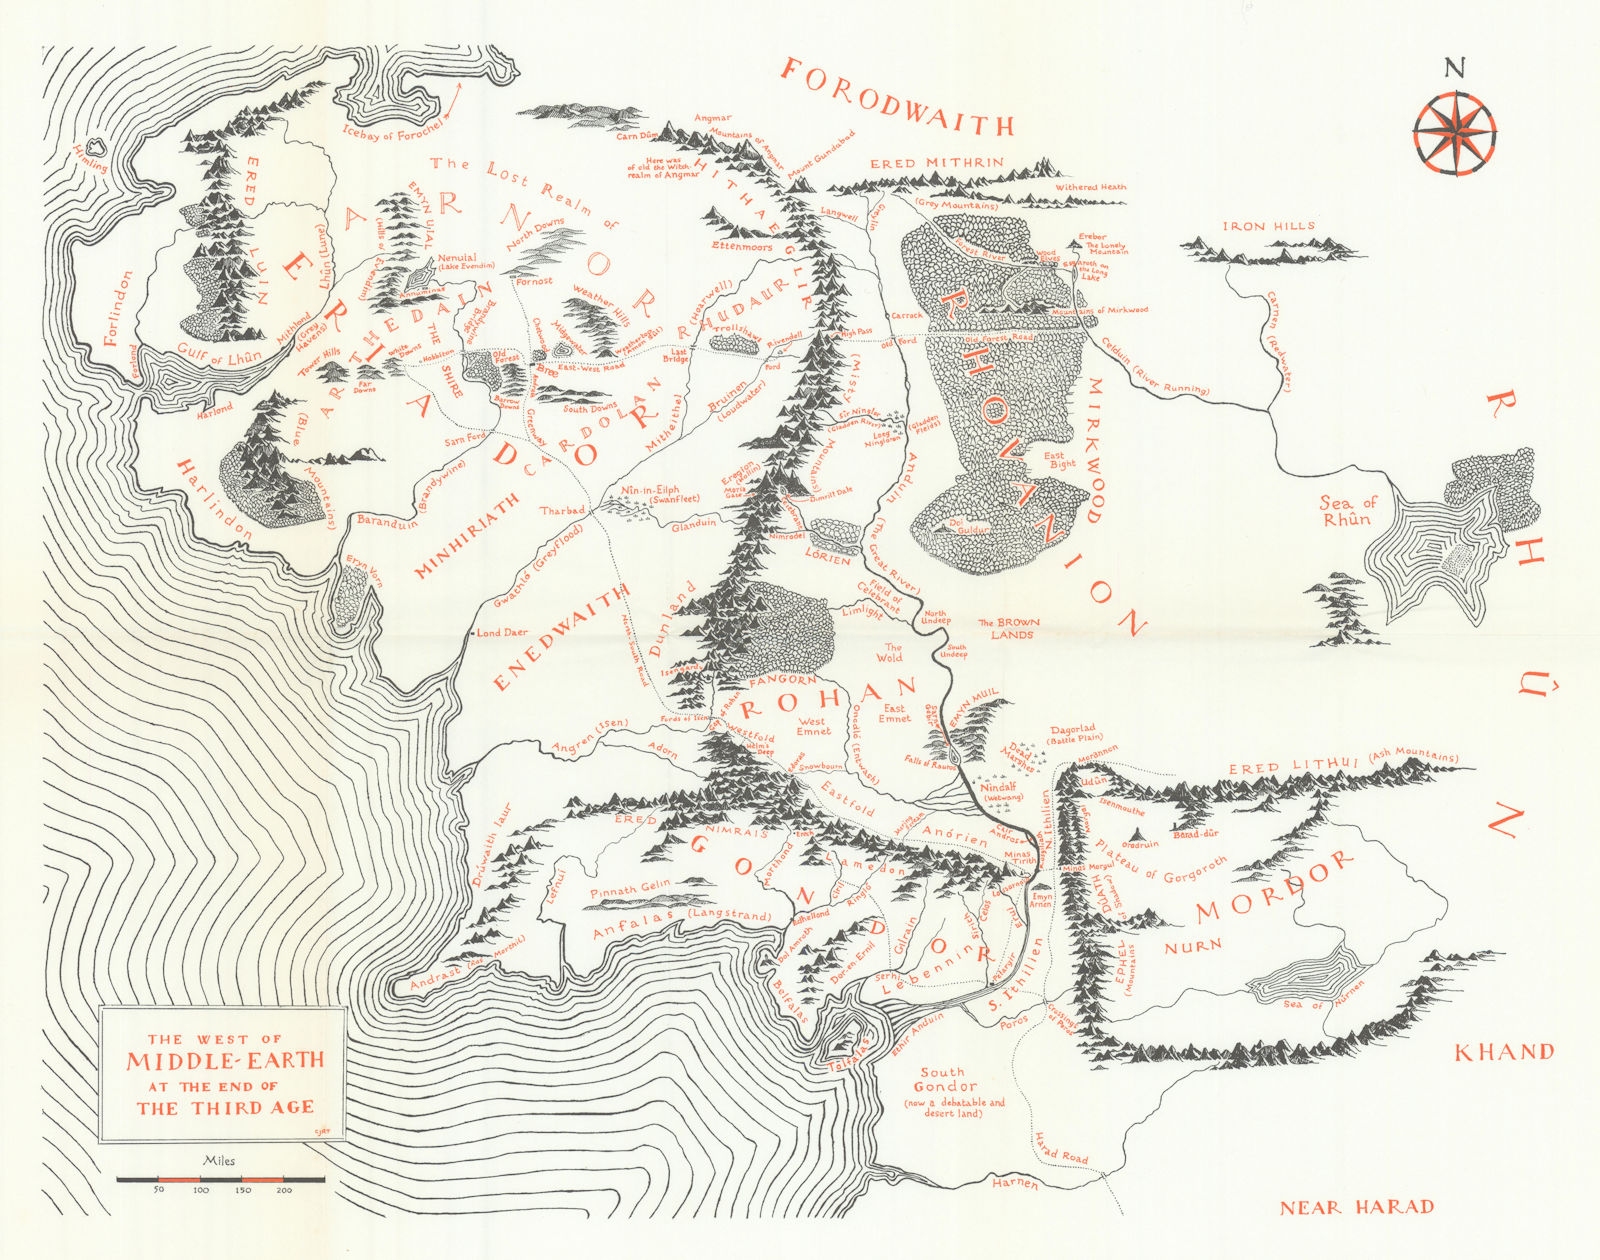 The West of Middle-Earth at the end of the Third Age Lord/Rings TOLKIEN 1980 map